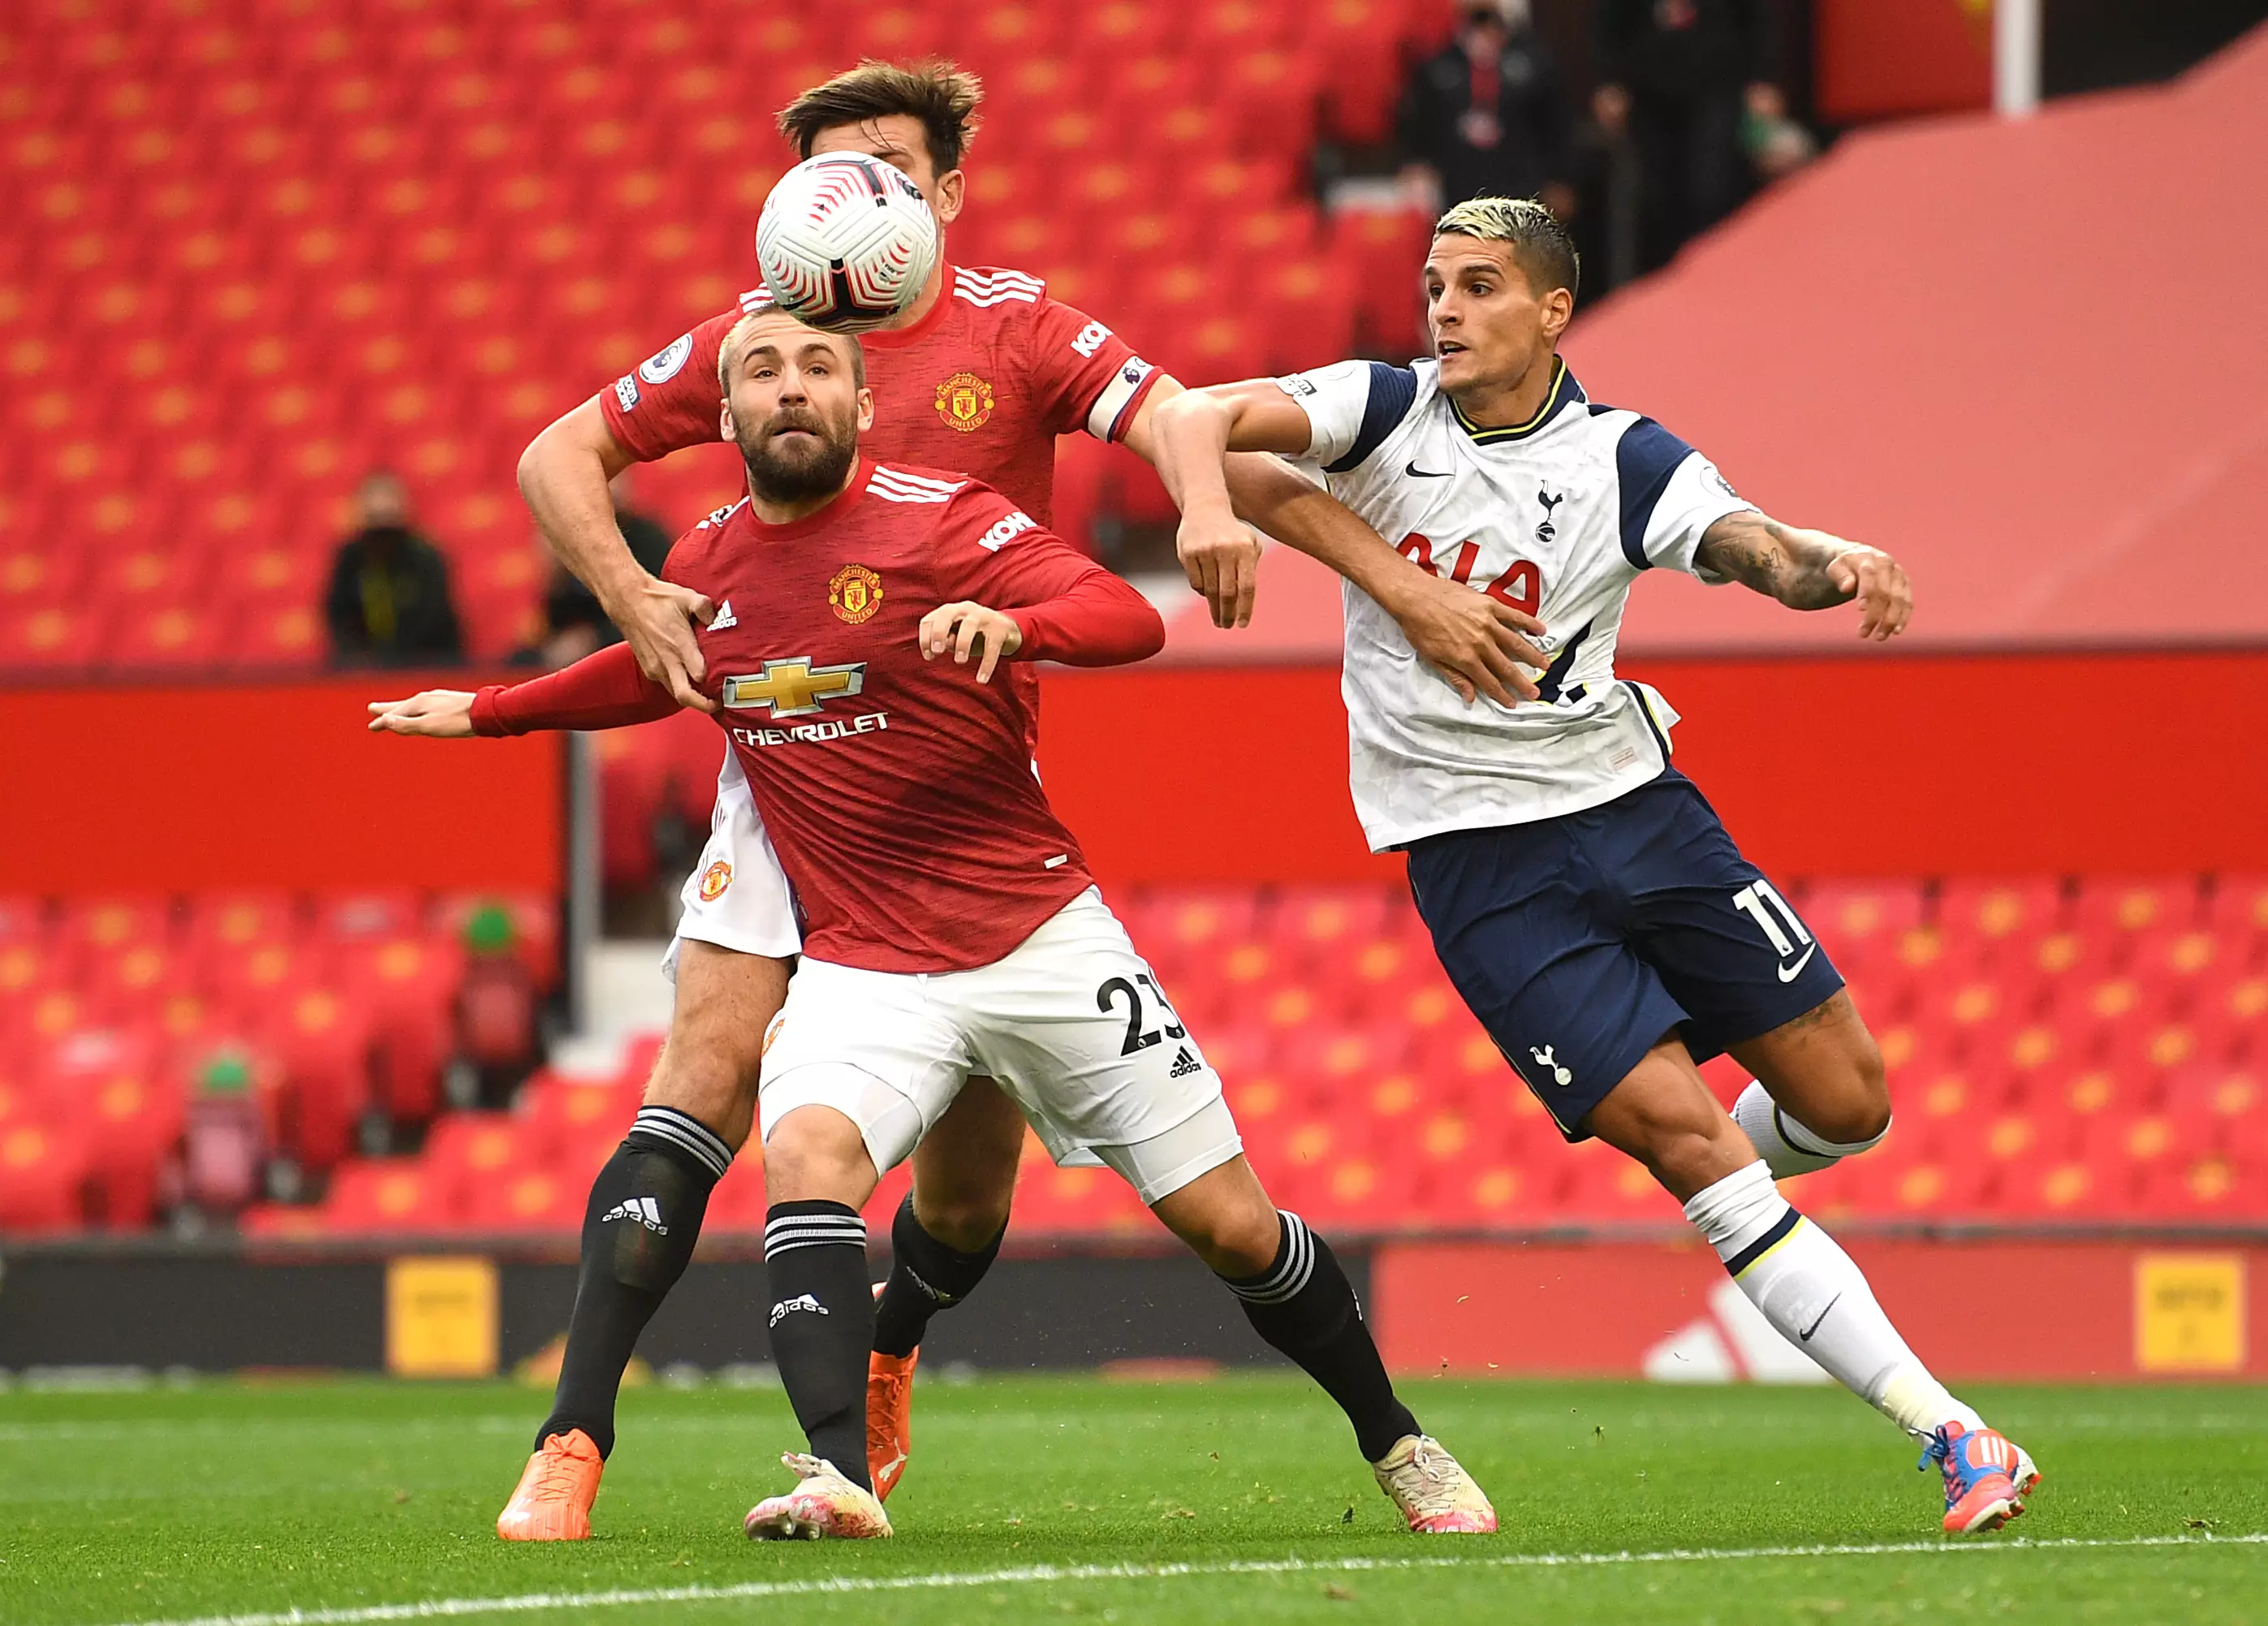 Maguire and Shaw struggled against Spurs. Image: PA Images